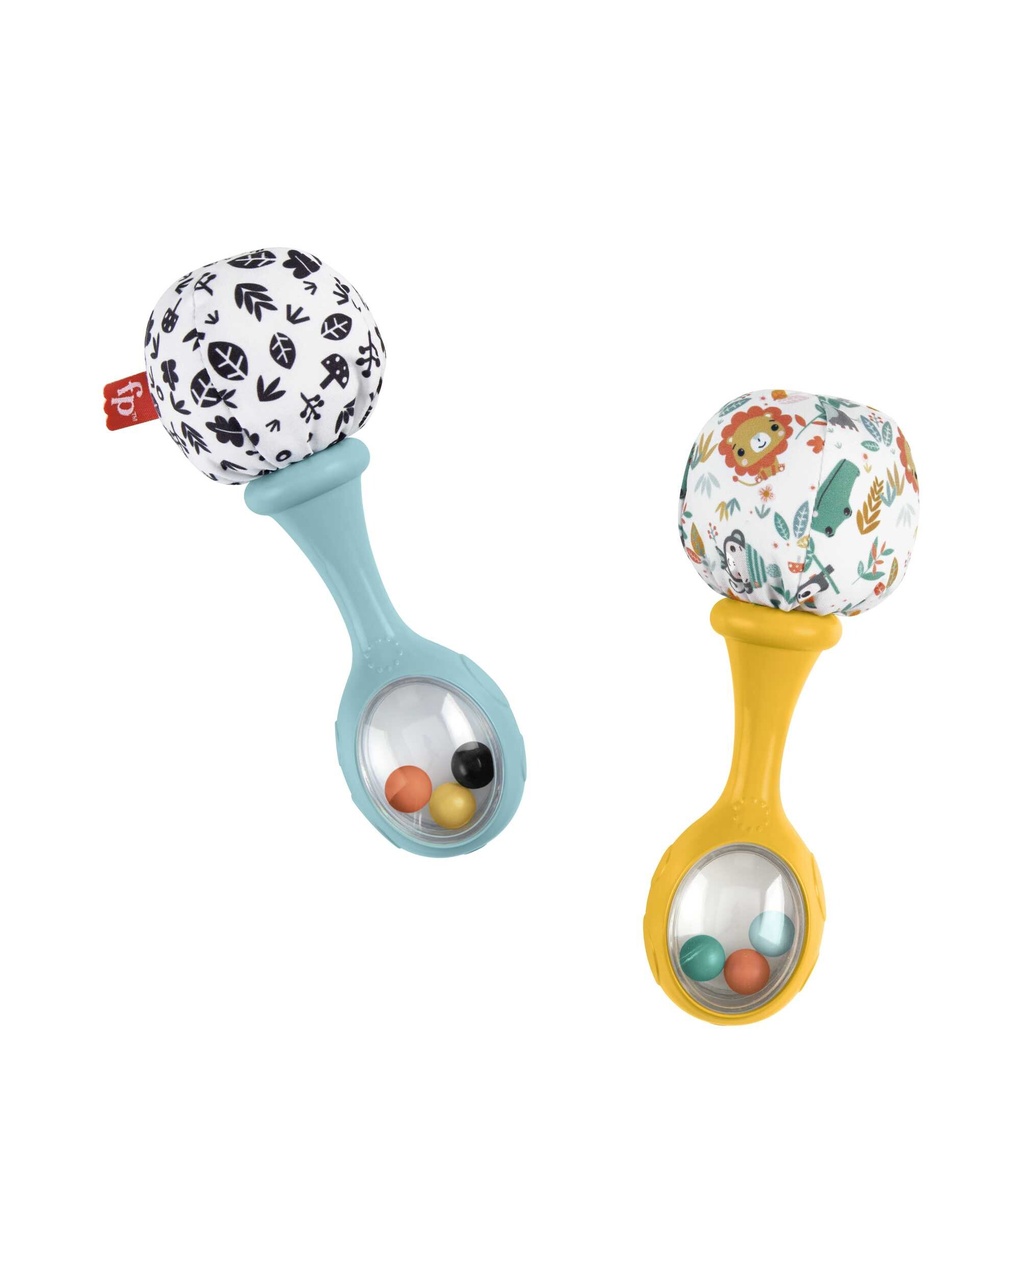 Maracas rattle and play - 3m+ - fisher price - Fisher-Price